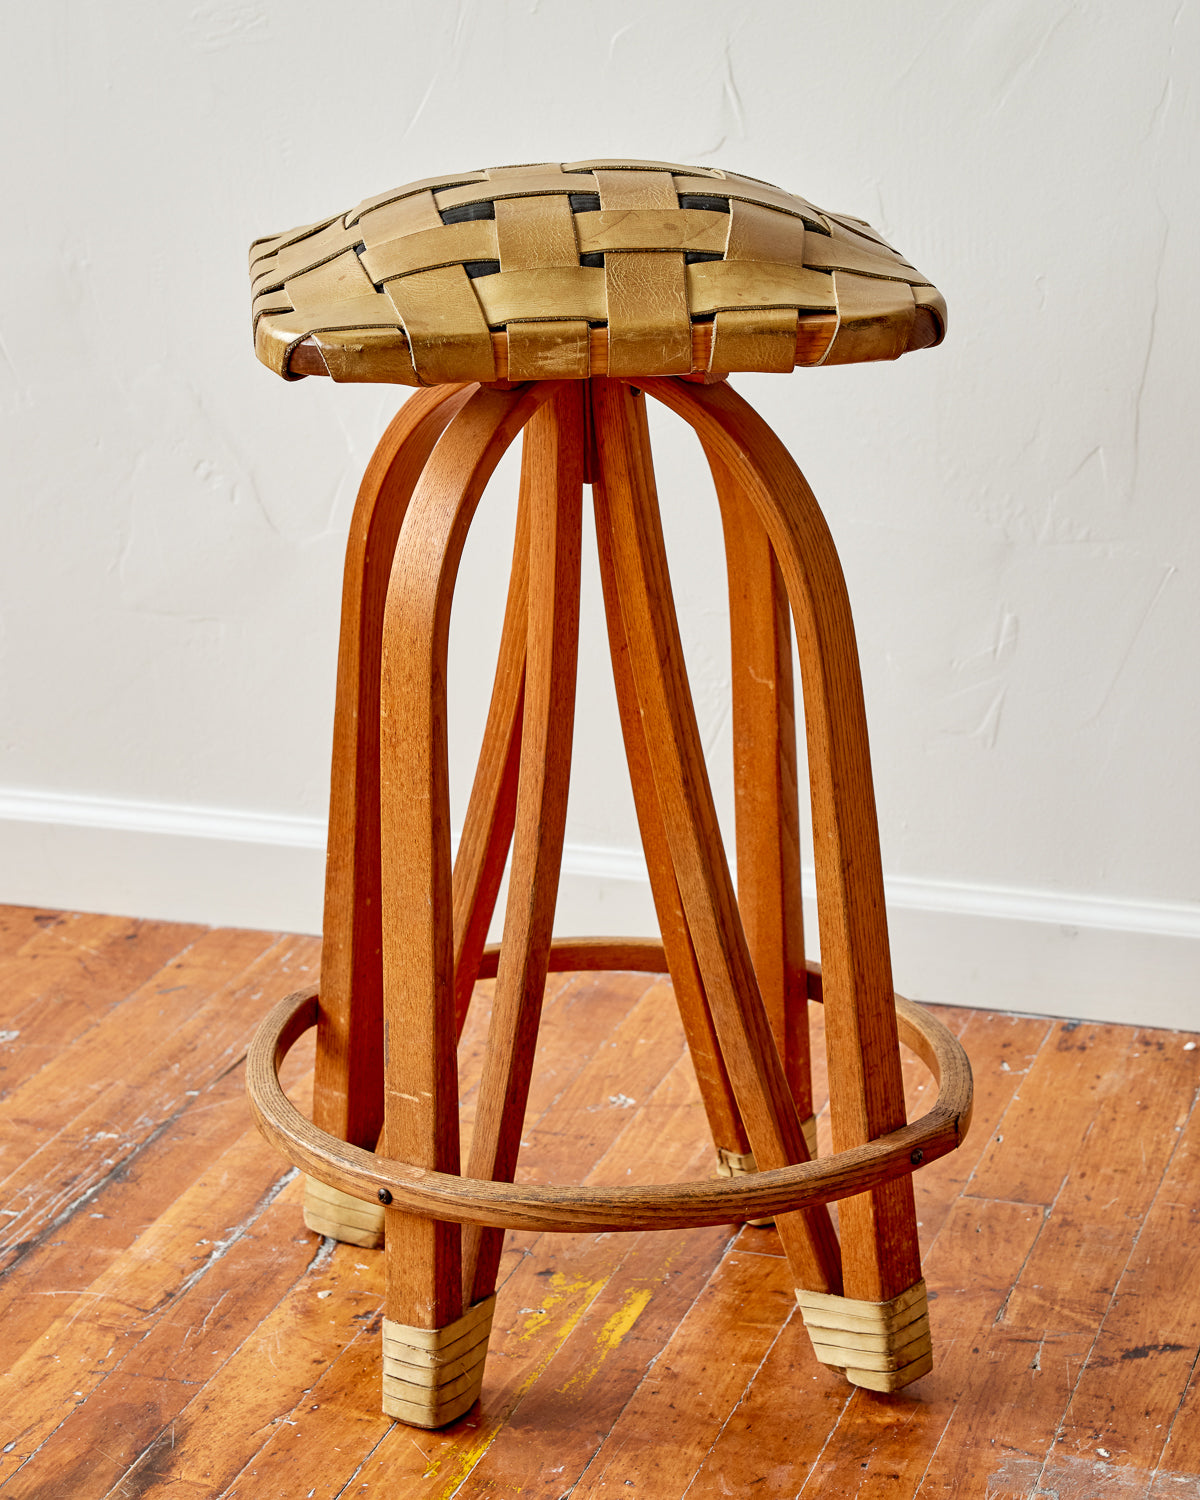 Woven Leather Stool